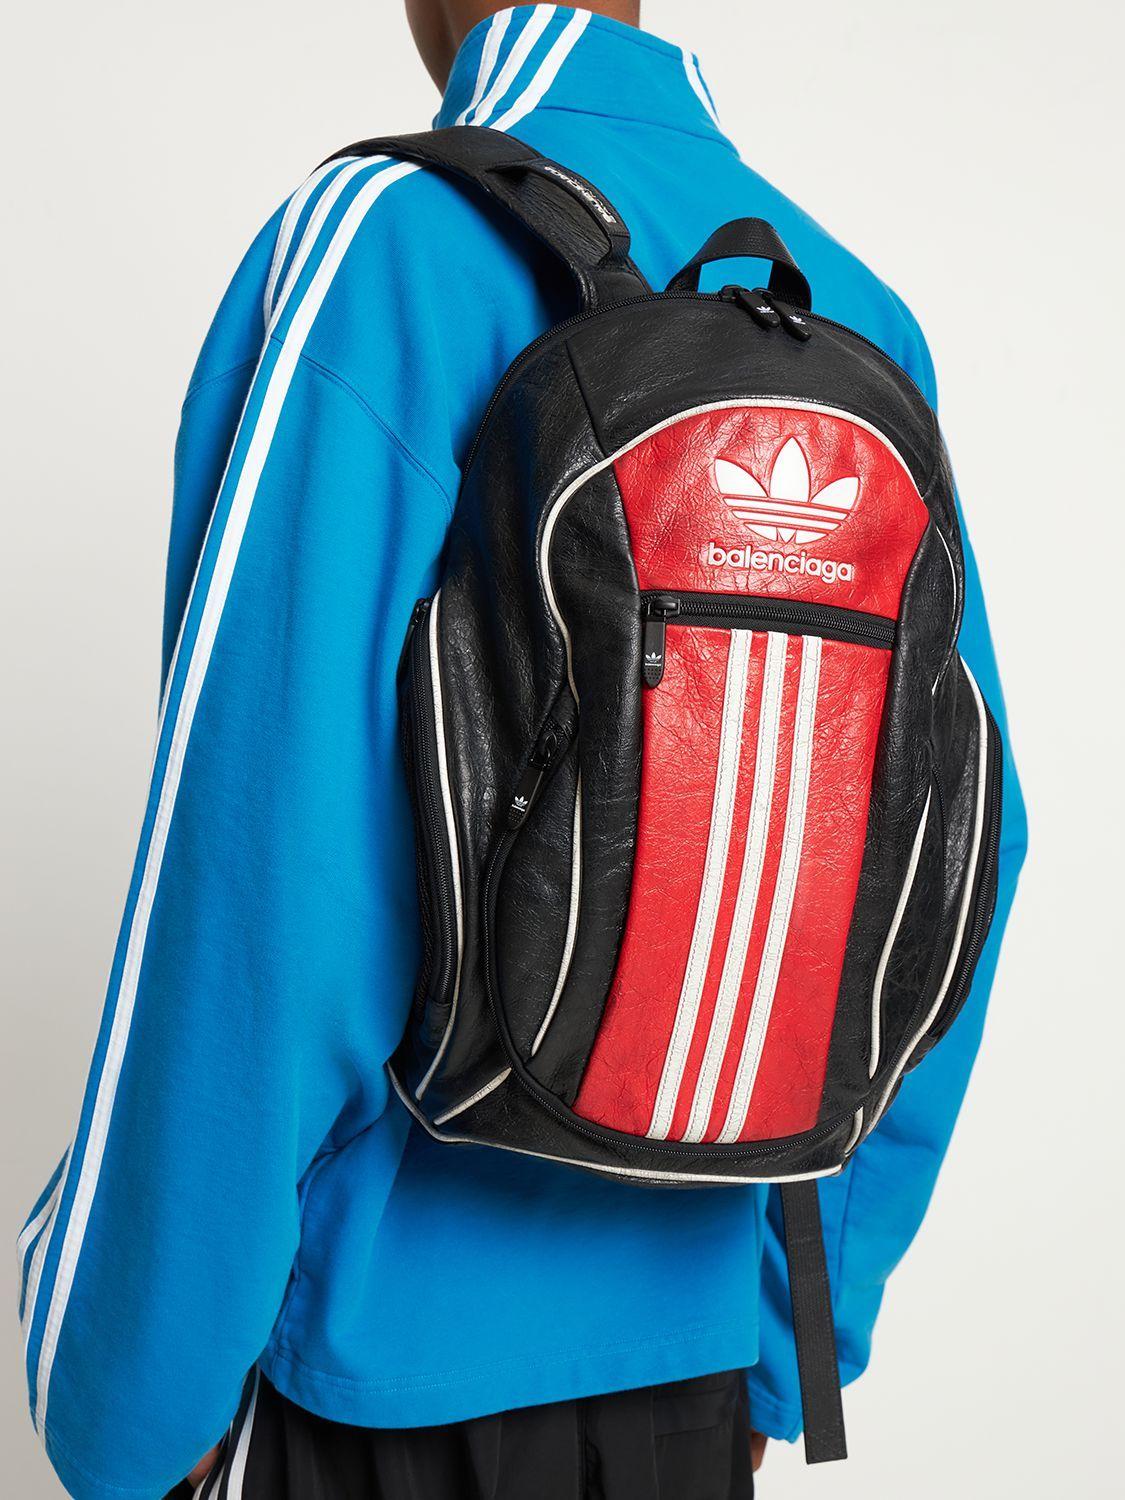 Balenciaga Adidas S Backpack in Red for Men | Lyst